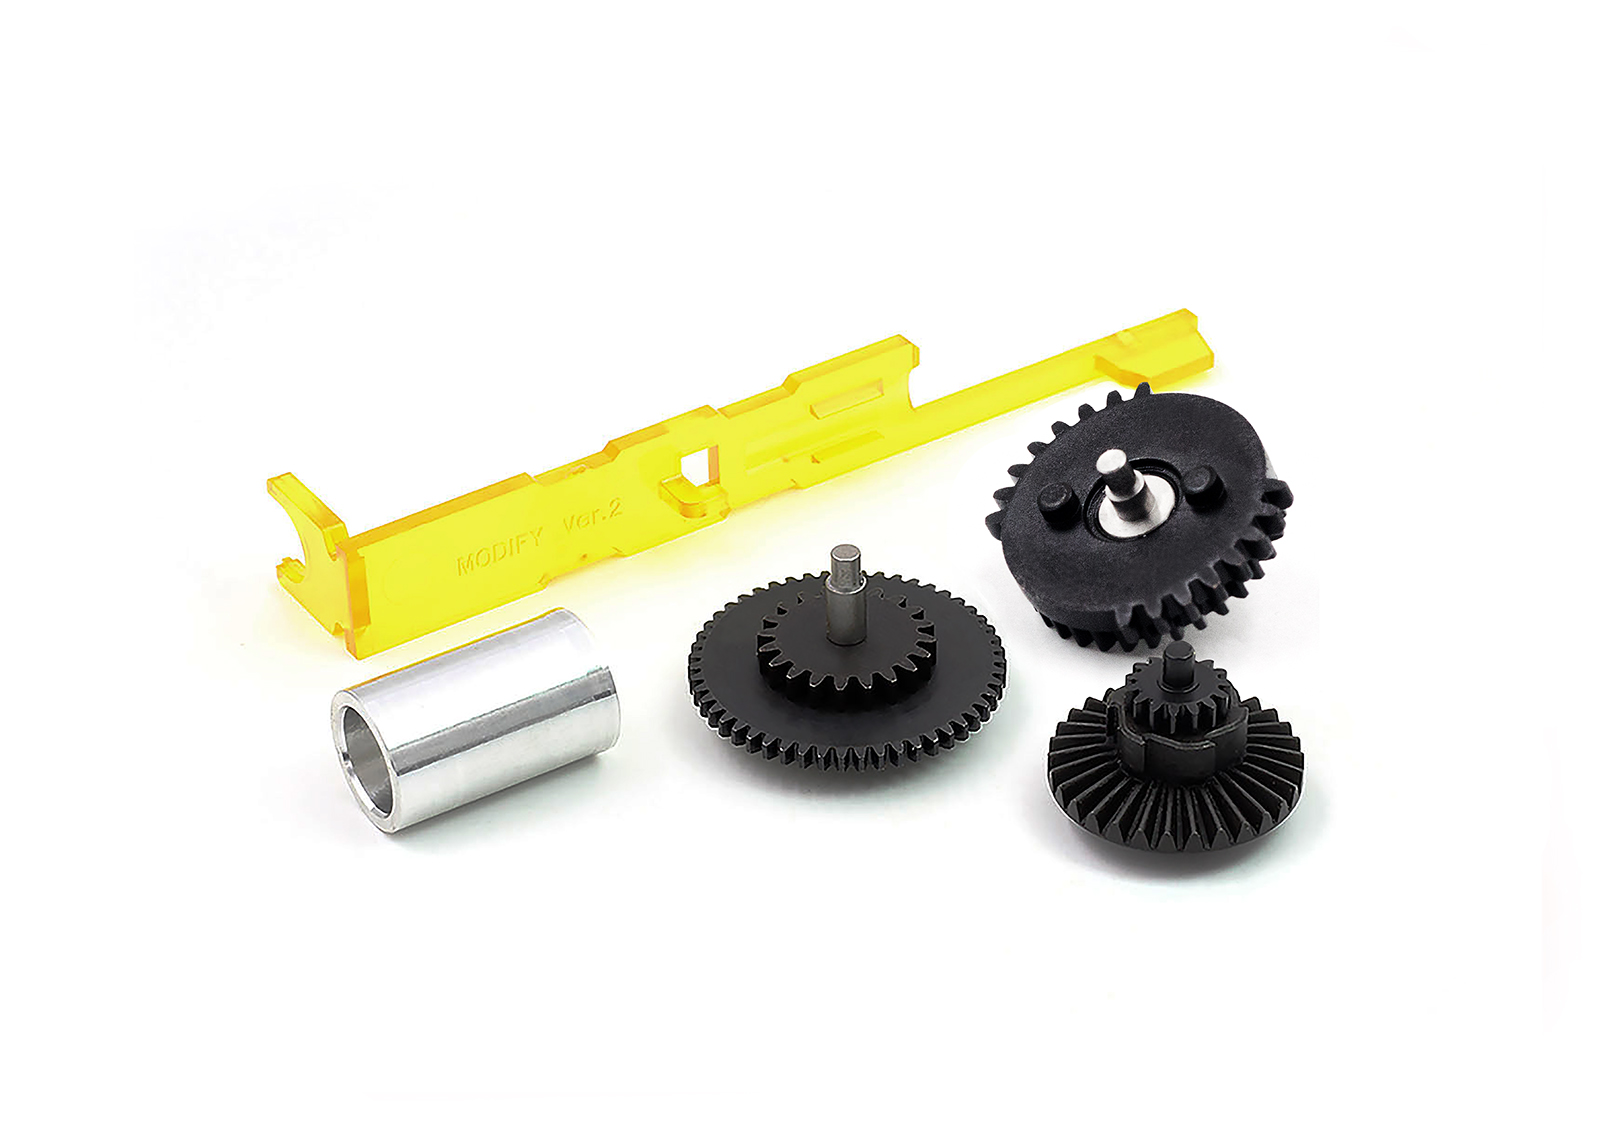 New Quantum Gear Set  (16.32:1) for Ver.2/Ver.3/Ver.6 Gearbox (with Spring Guide Spacer + Special Tappet Ver. 2)